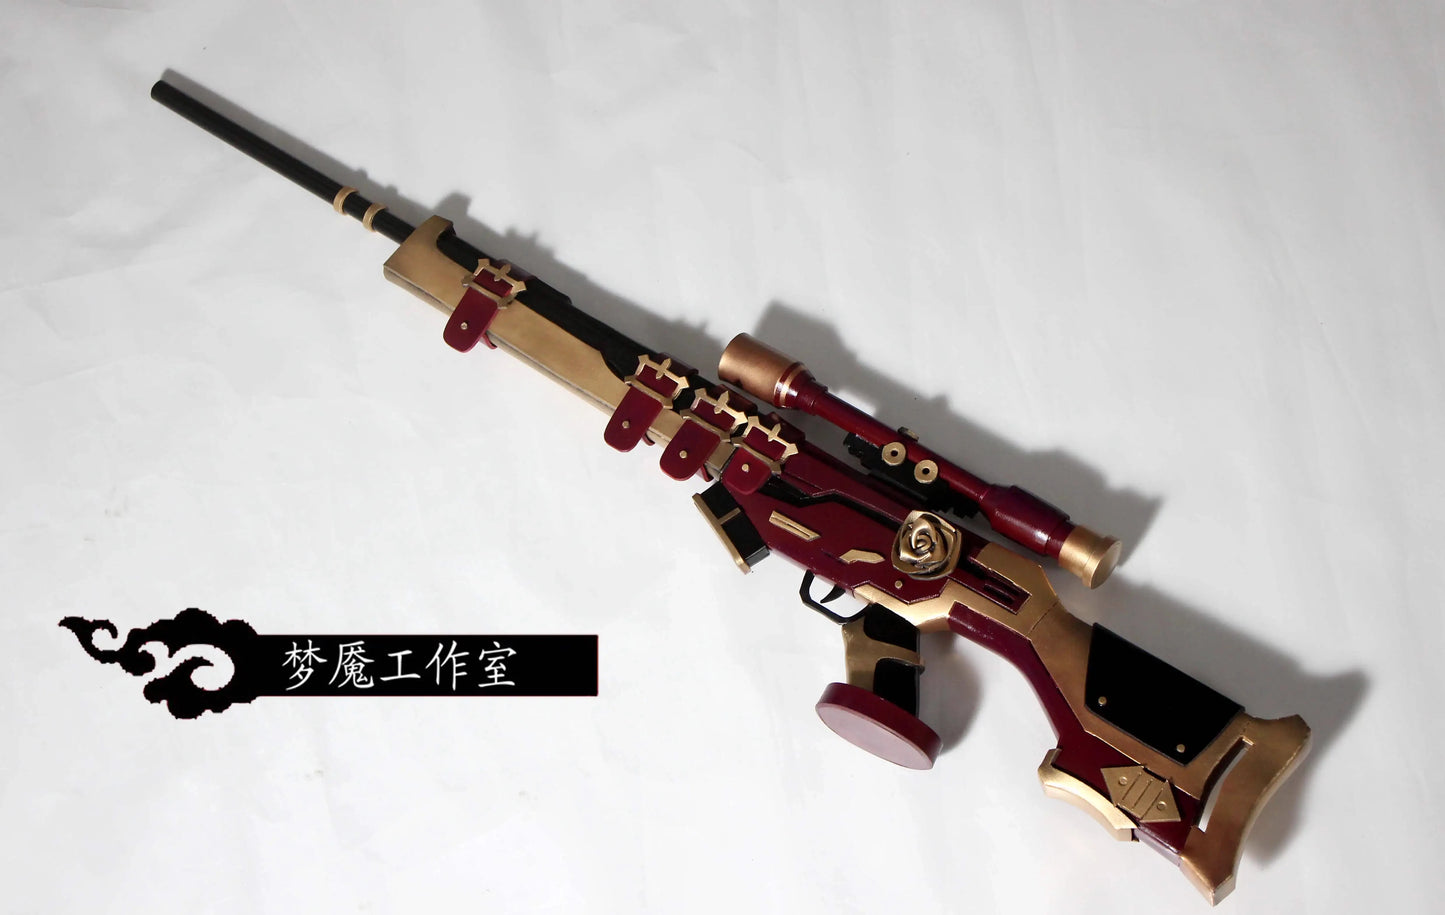 Blue Archive Rikuhatima Aru Cosplay Weapon Gun Props Cannot Be Fired Halloween Christmas Party Comic Show Accessory